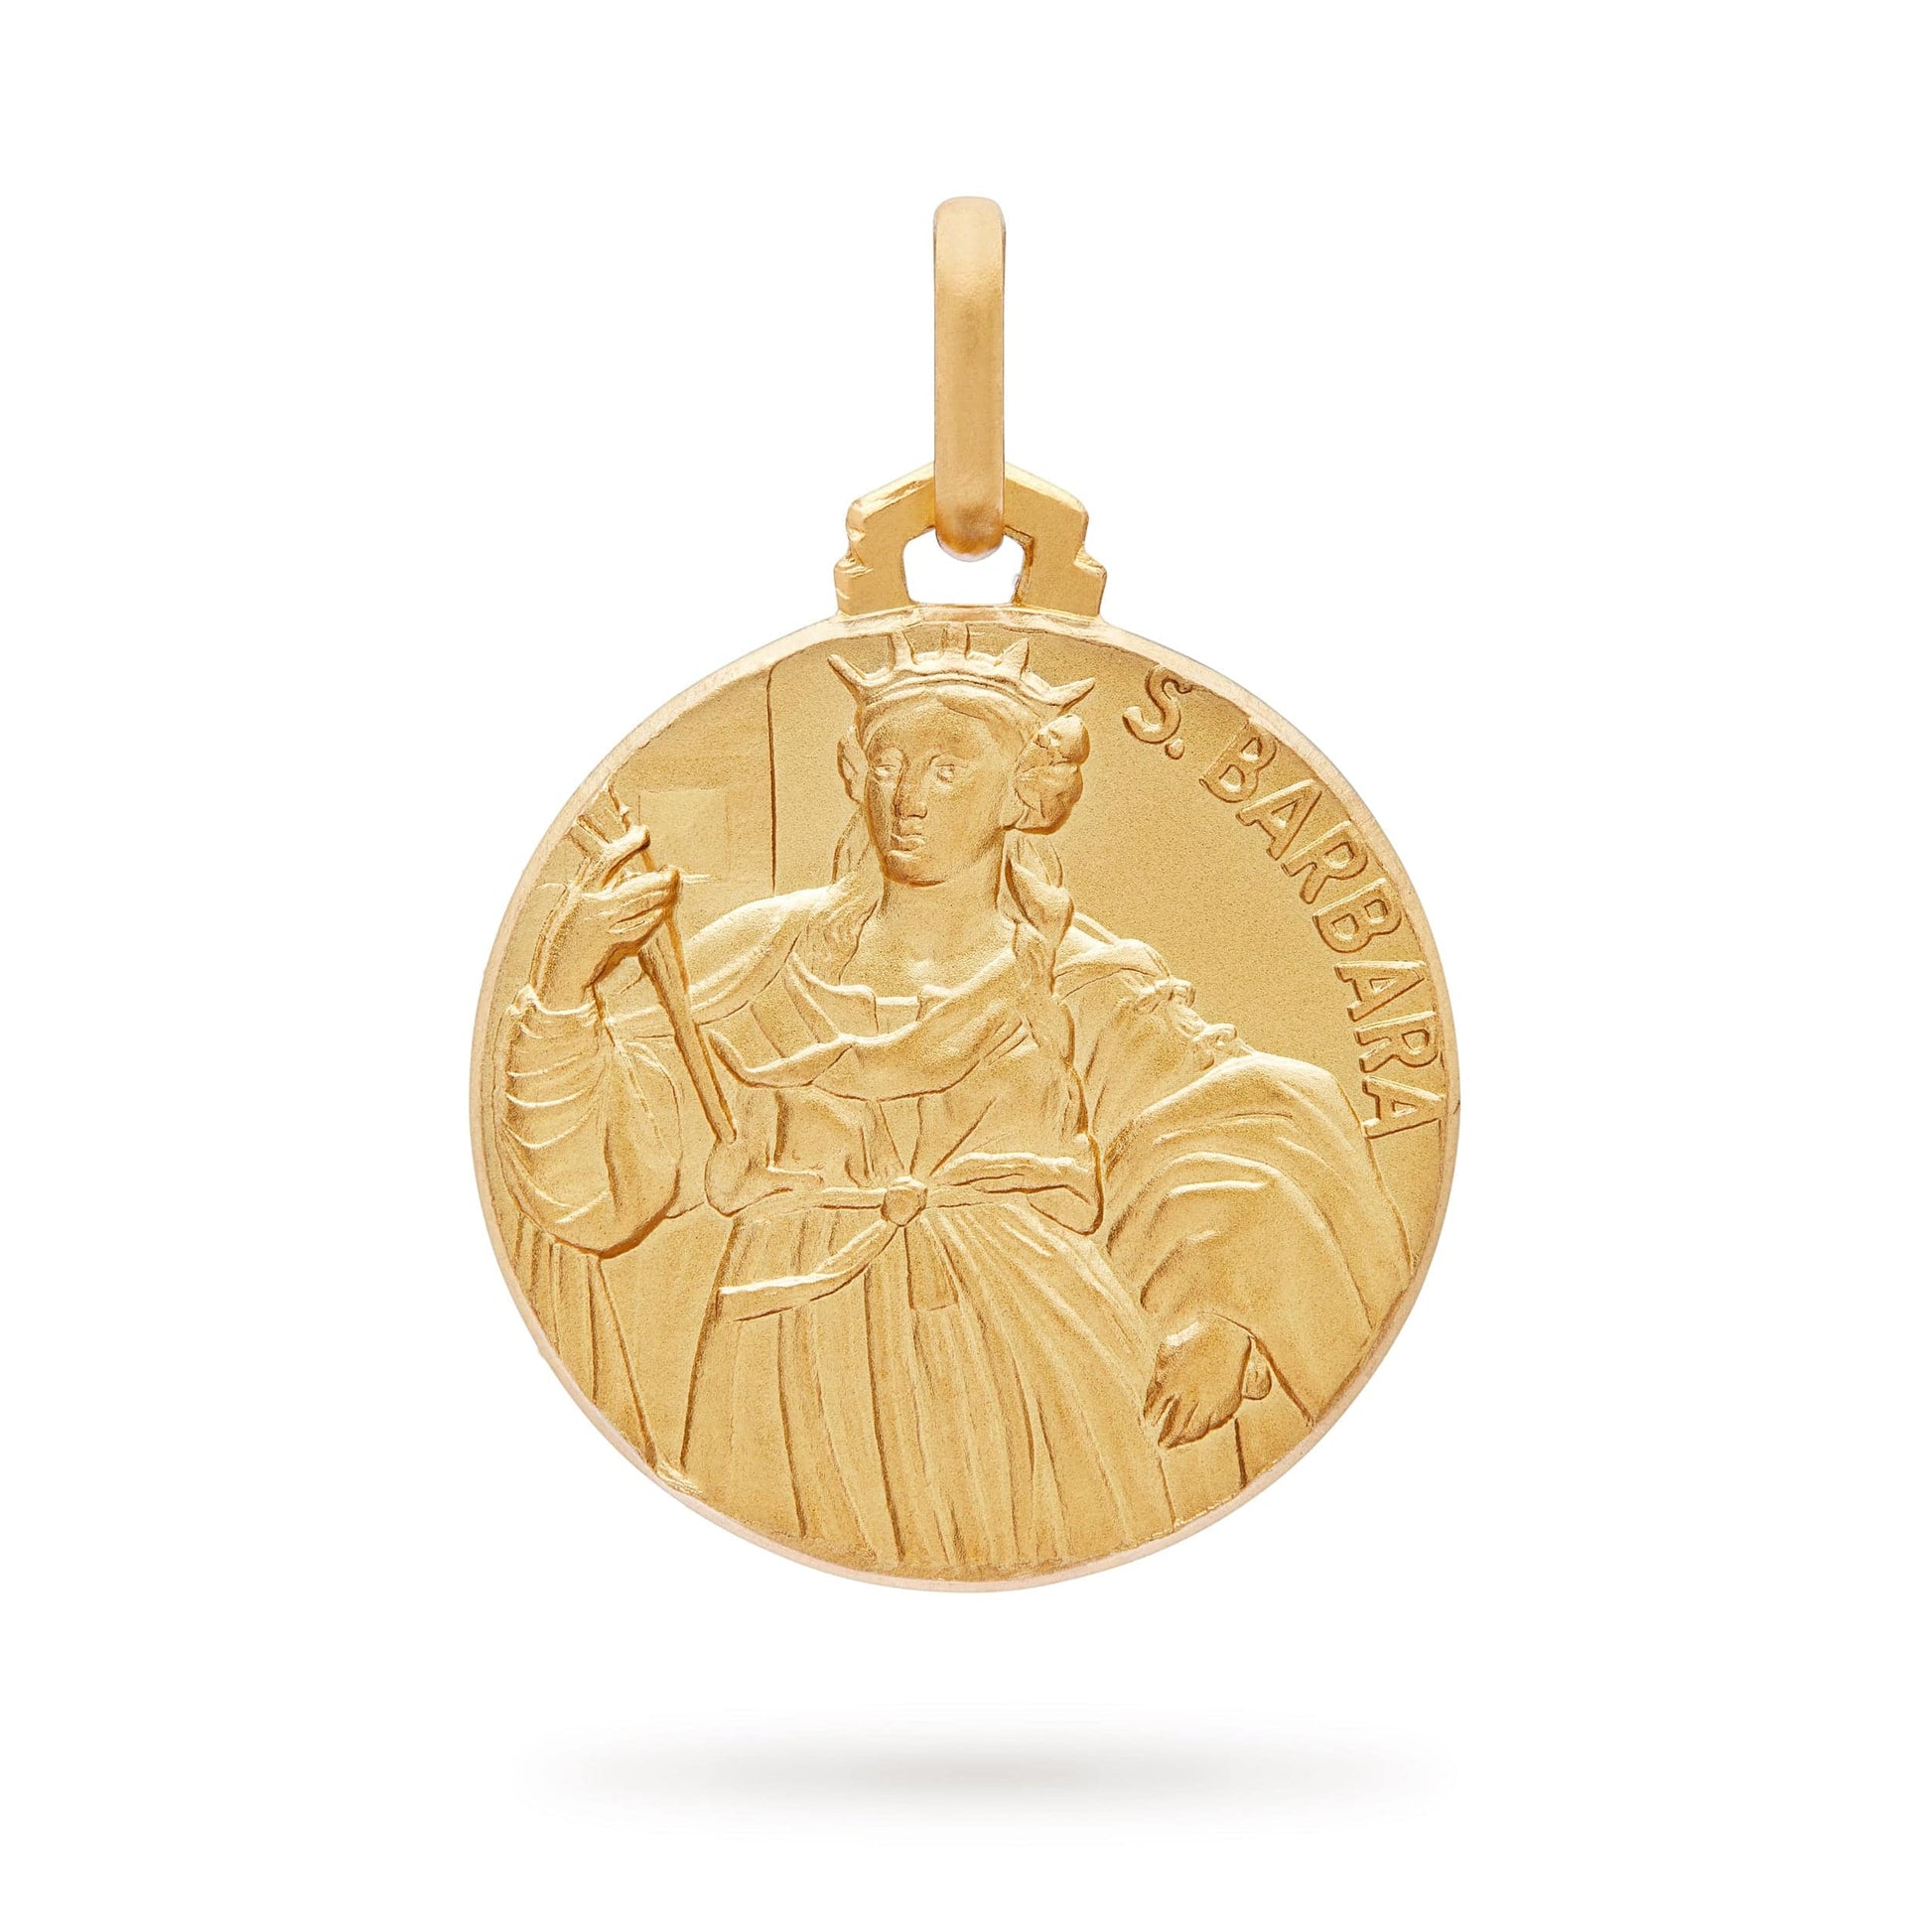 MONDO CATTOLICO 18 mm Gold Medal of St Barbara